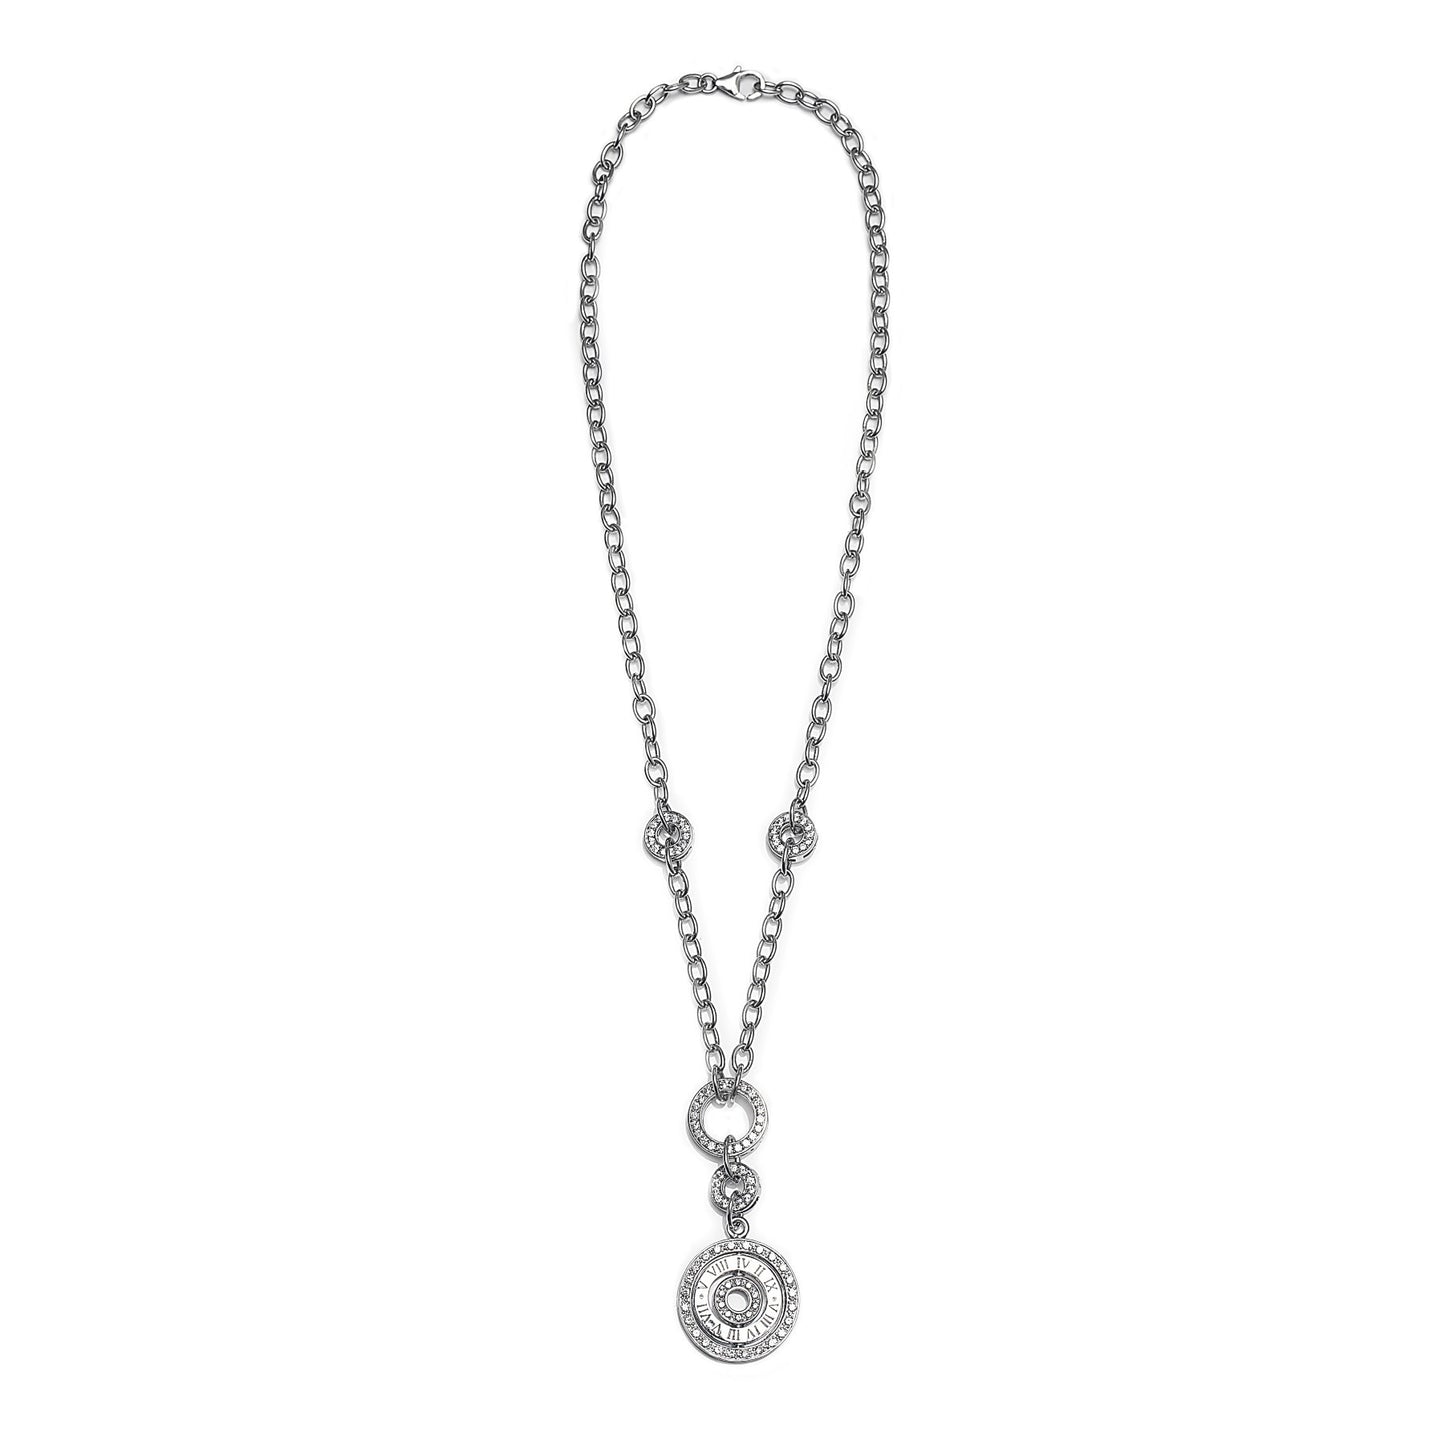 Amazing Short Juicy Necklace in 925 Sterling Silver with a Flip Pendant with Roman Numerals and cubic zirconia. Worldwide shipping from Australia. Affordable luxury jewellery by Bellagio & Co.